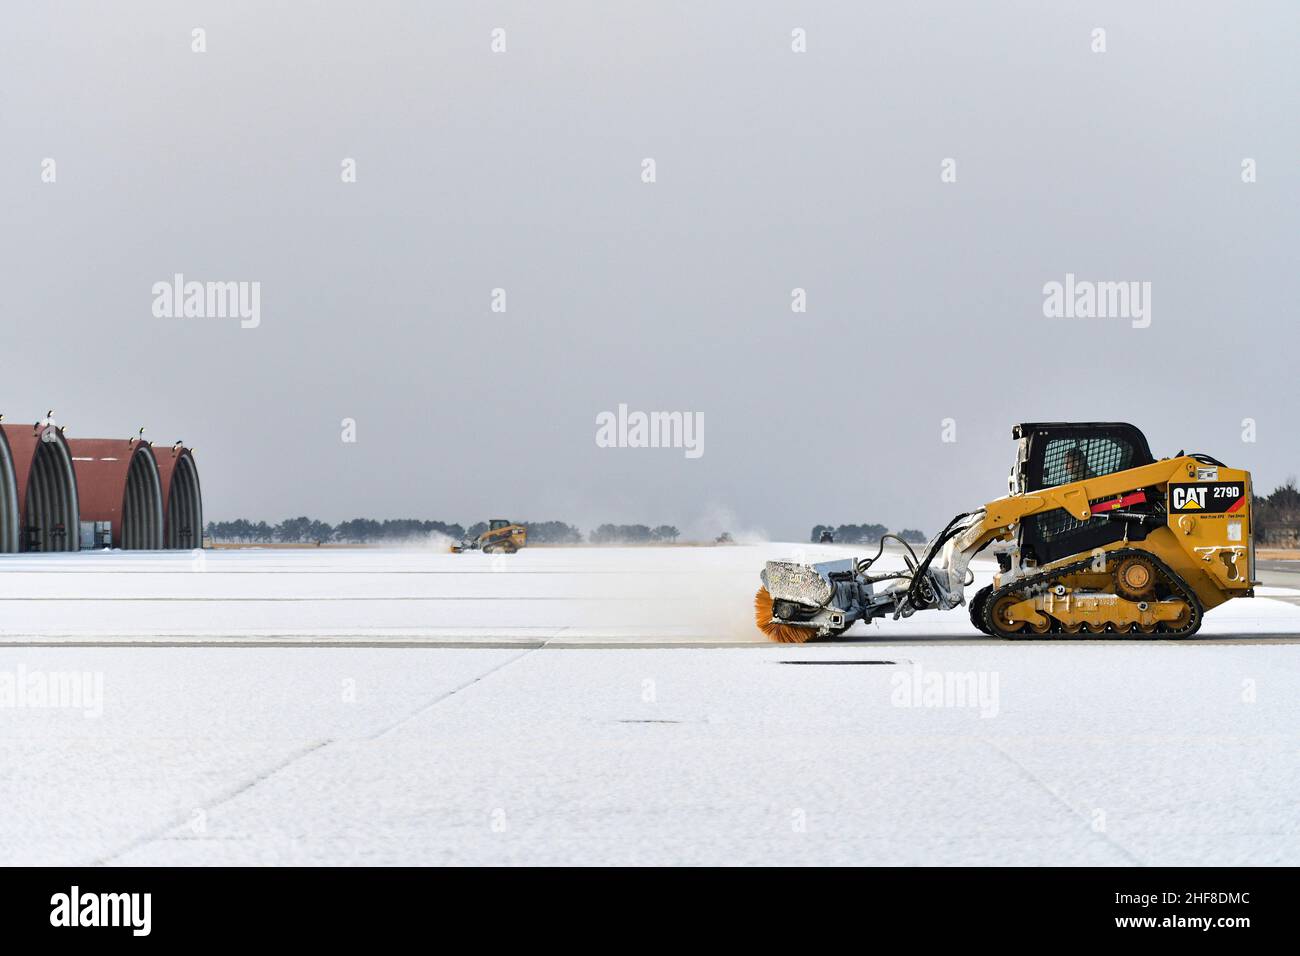 Jan 13, 2022 - Kunsan Air Base, Jeollabuk-do, South Korea - Airmen from the 35th Aircraft Maintenance Unit and 8th Civil Engineer Squadron operate combat track loaders and airfield brushes for snow removal at Kunsan Air Base, Republic of Korea, Jan. 13, 2022. The 8th CES heavy equipment operators, also known as the Dirt Boyz, trained and certified the 35th AMU maintainers to efficiently remove snow and ice, resulting in a mission-ready flightline. Credit: Mya M. Crosby/U.S. Air Force/ZUMA Press Wire Service/ZUMAPRESS.com/Alamy Live News Stock Photo